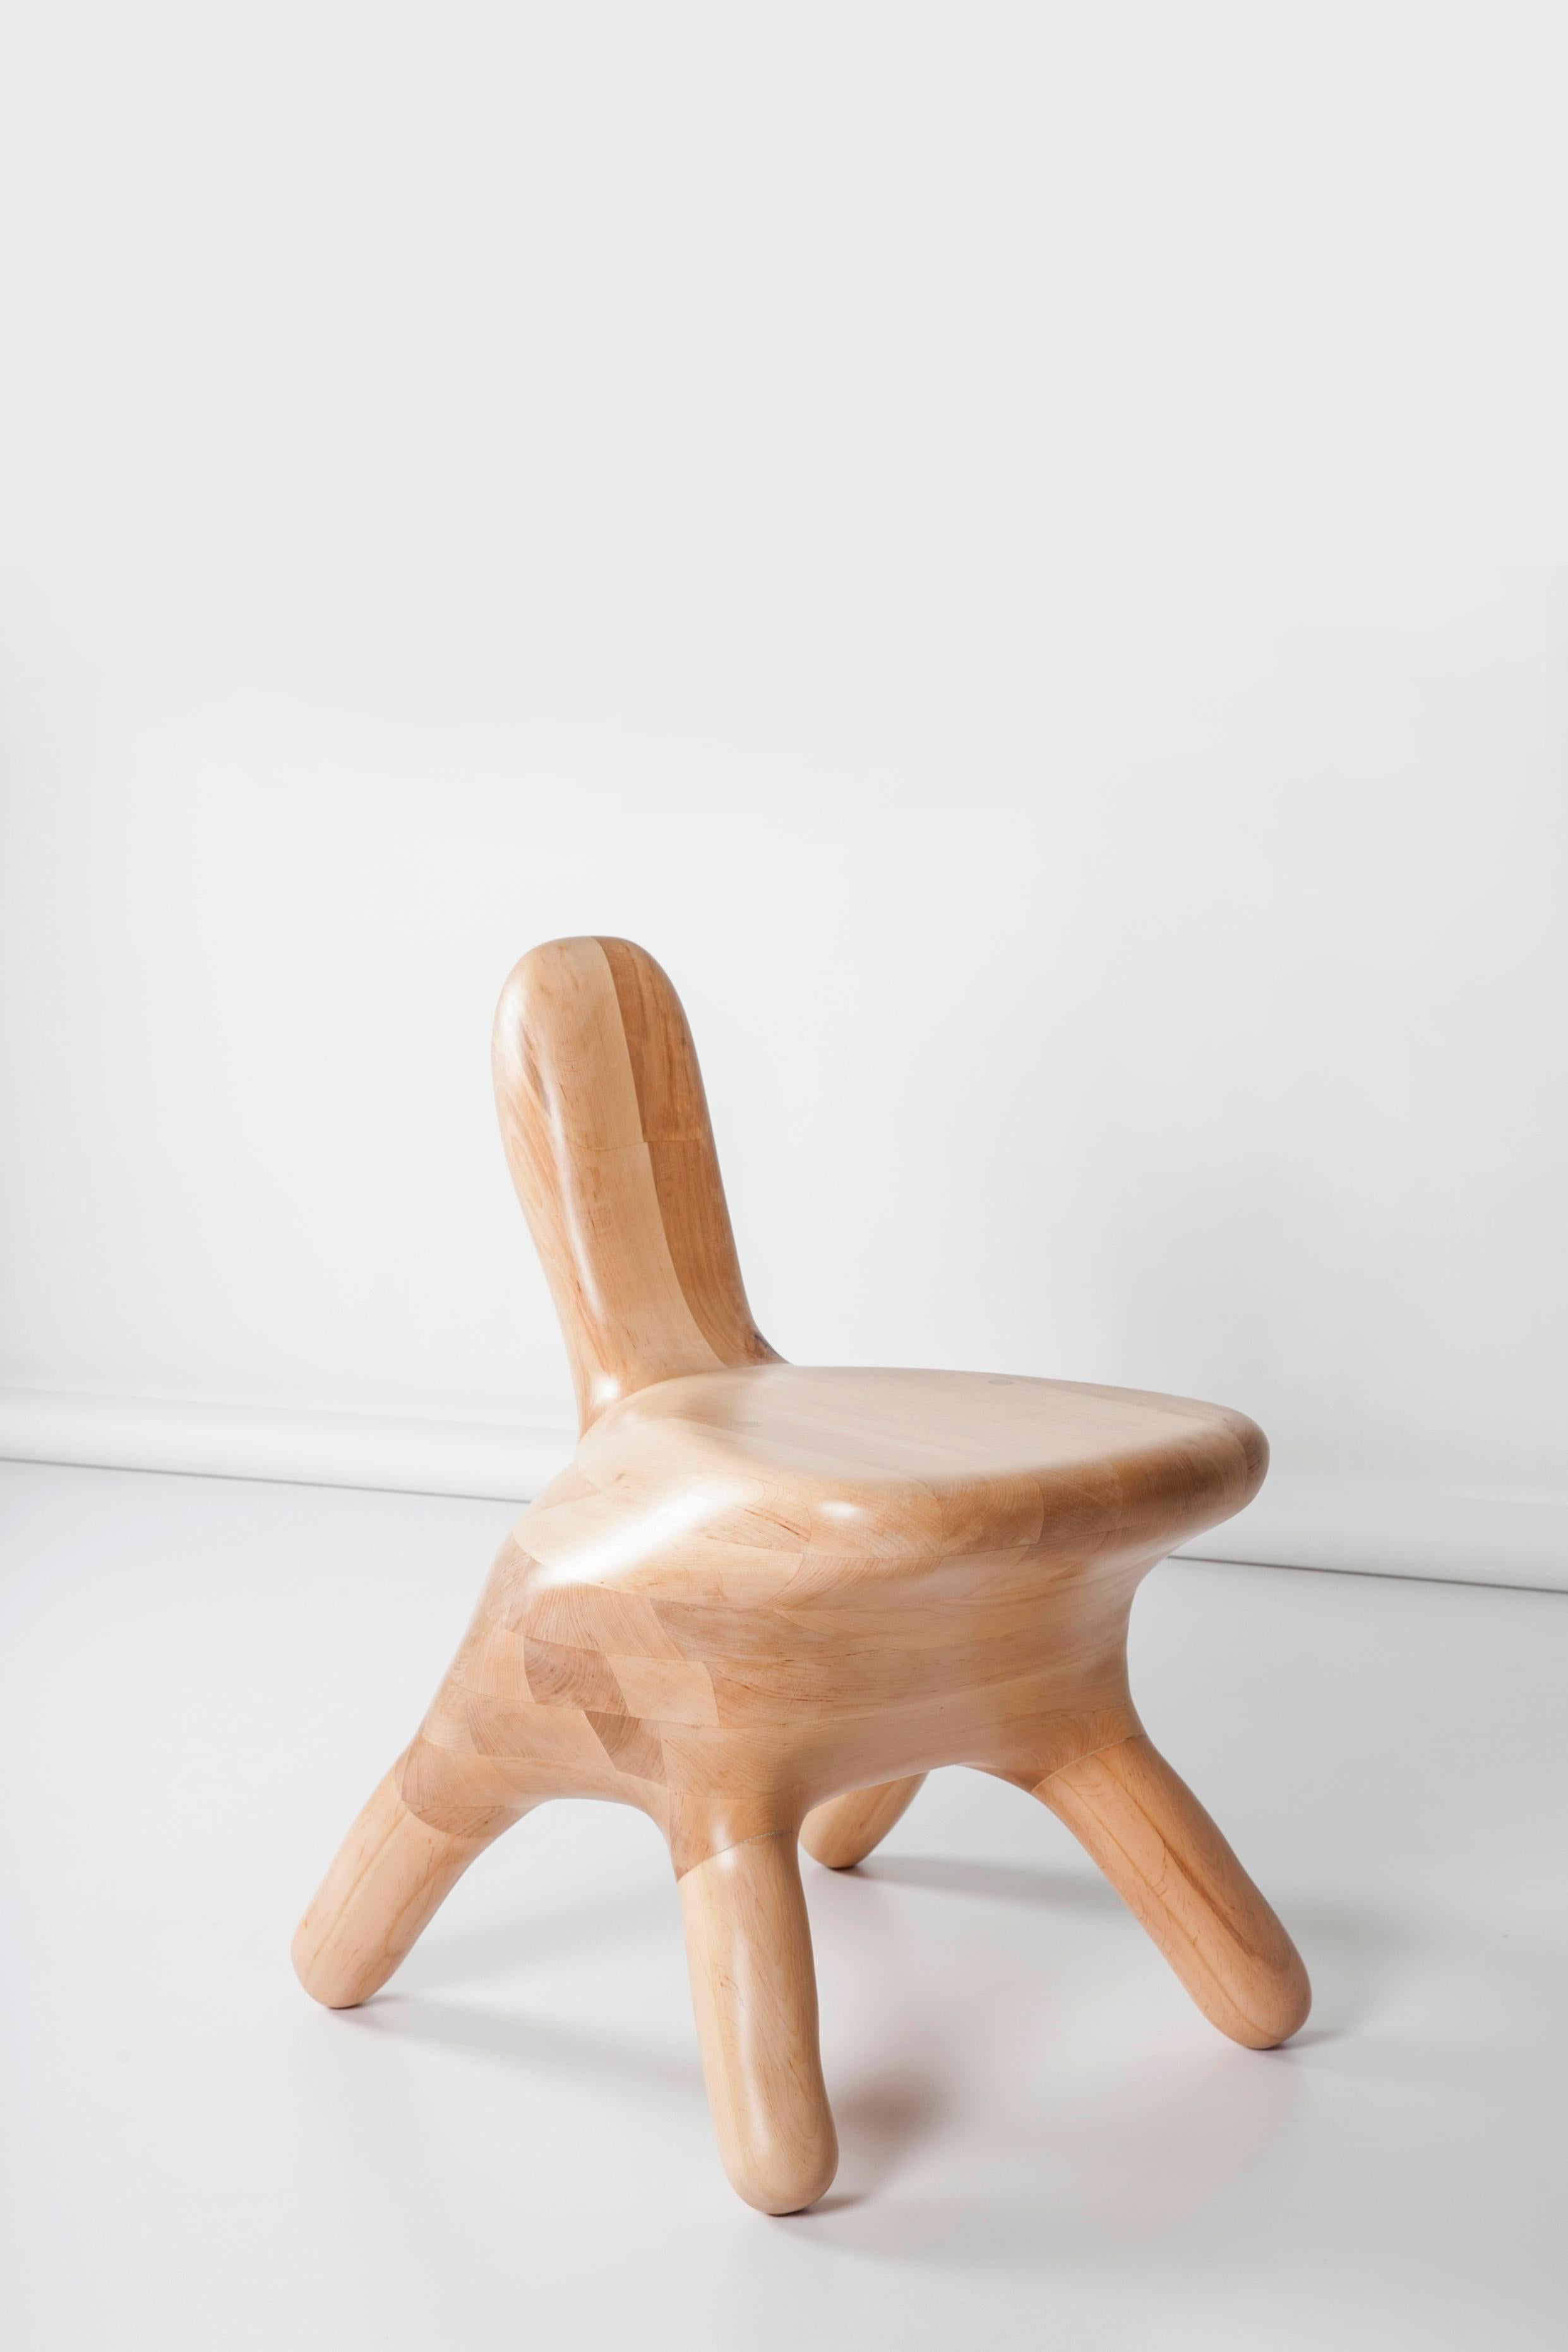 Anna Bera shape N2 chair by Nów
Designed by Anna Bera
Dimensions: D 58 x W 51 x H 72 cm
Materials: hand-carved alder wood

As an artist, woodcarver and carpenter, Anna creates wooden furniture pieces, mainly storages and cabinets crafted by